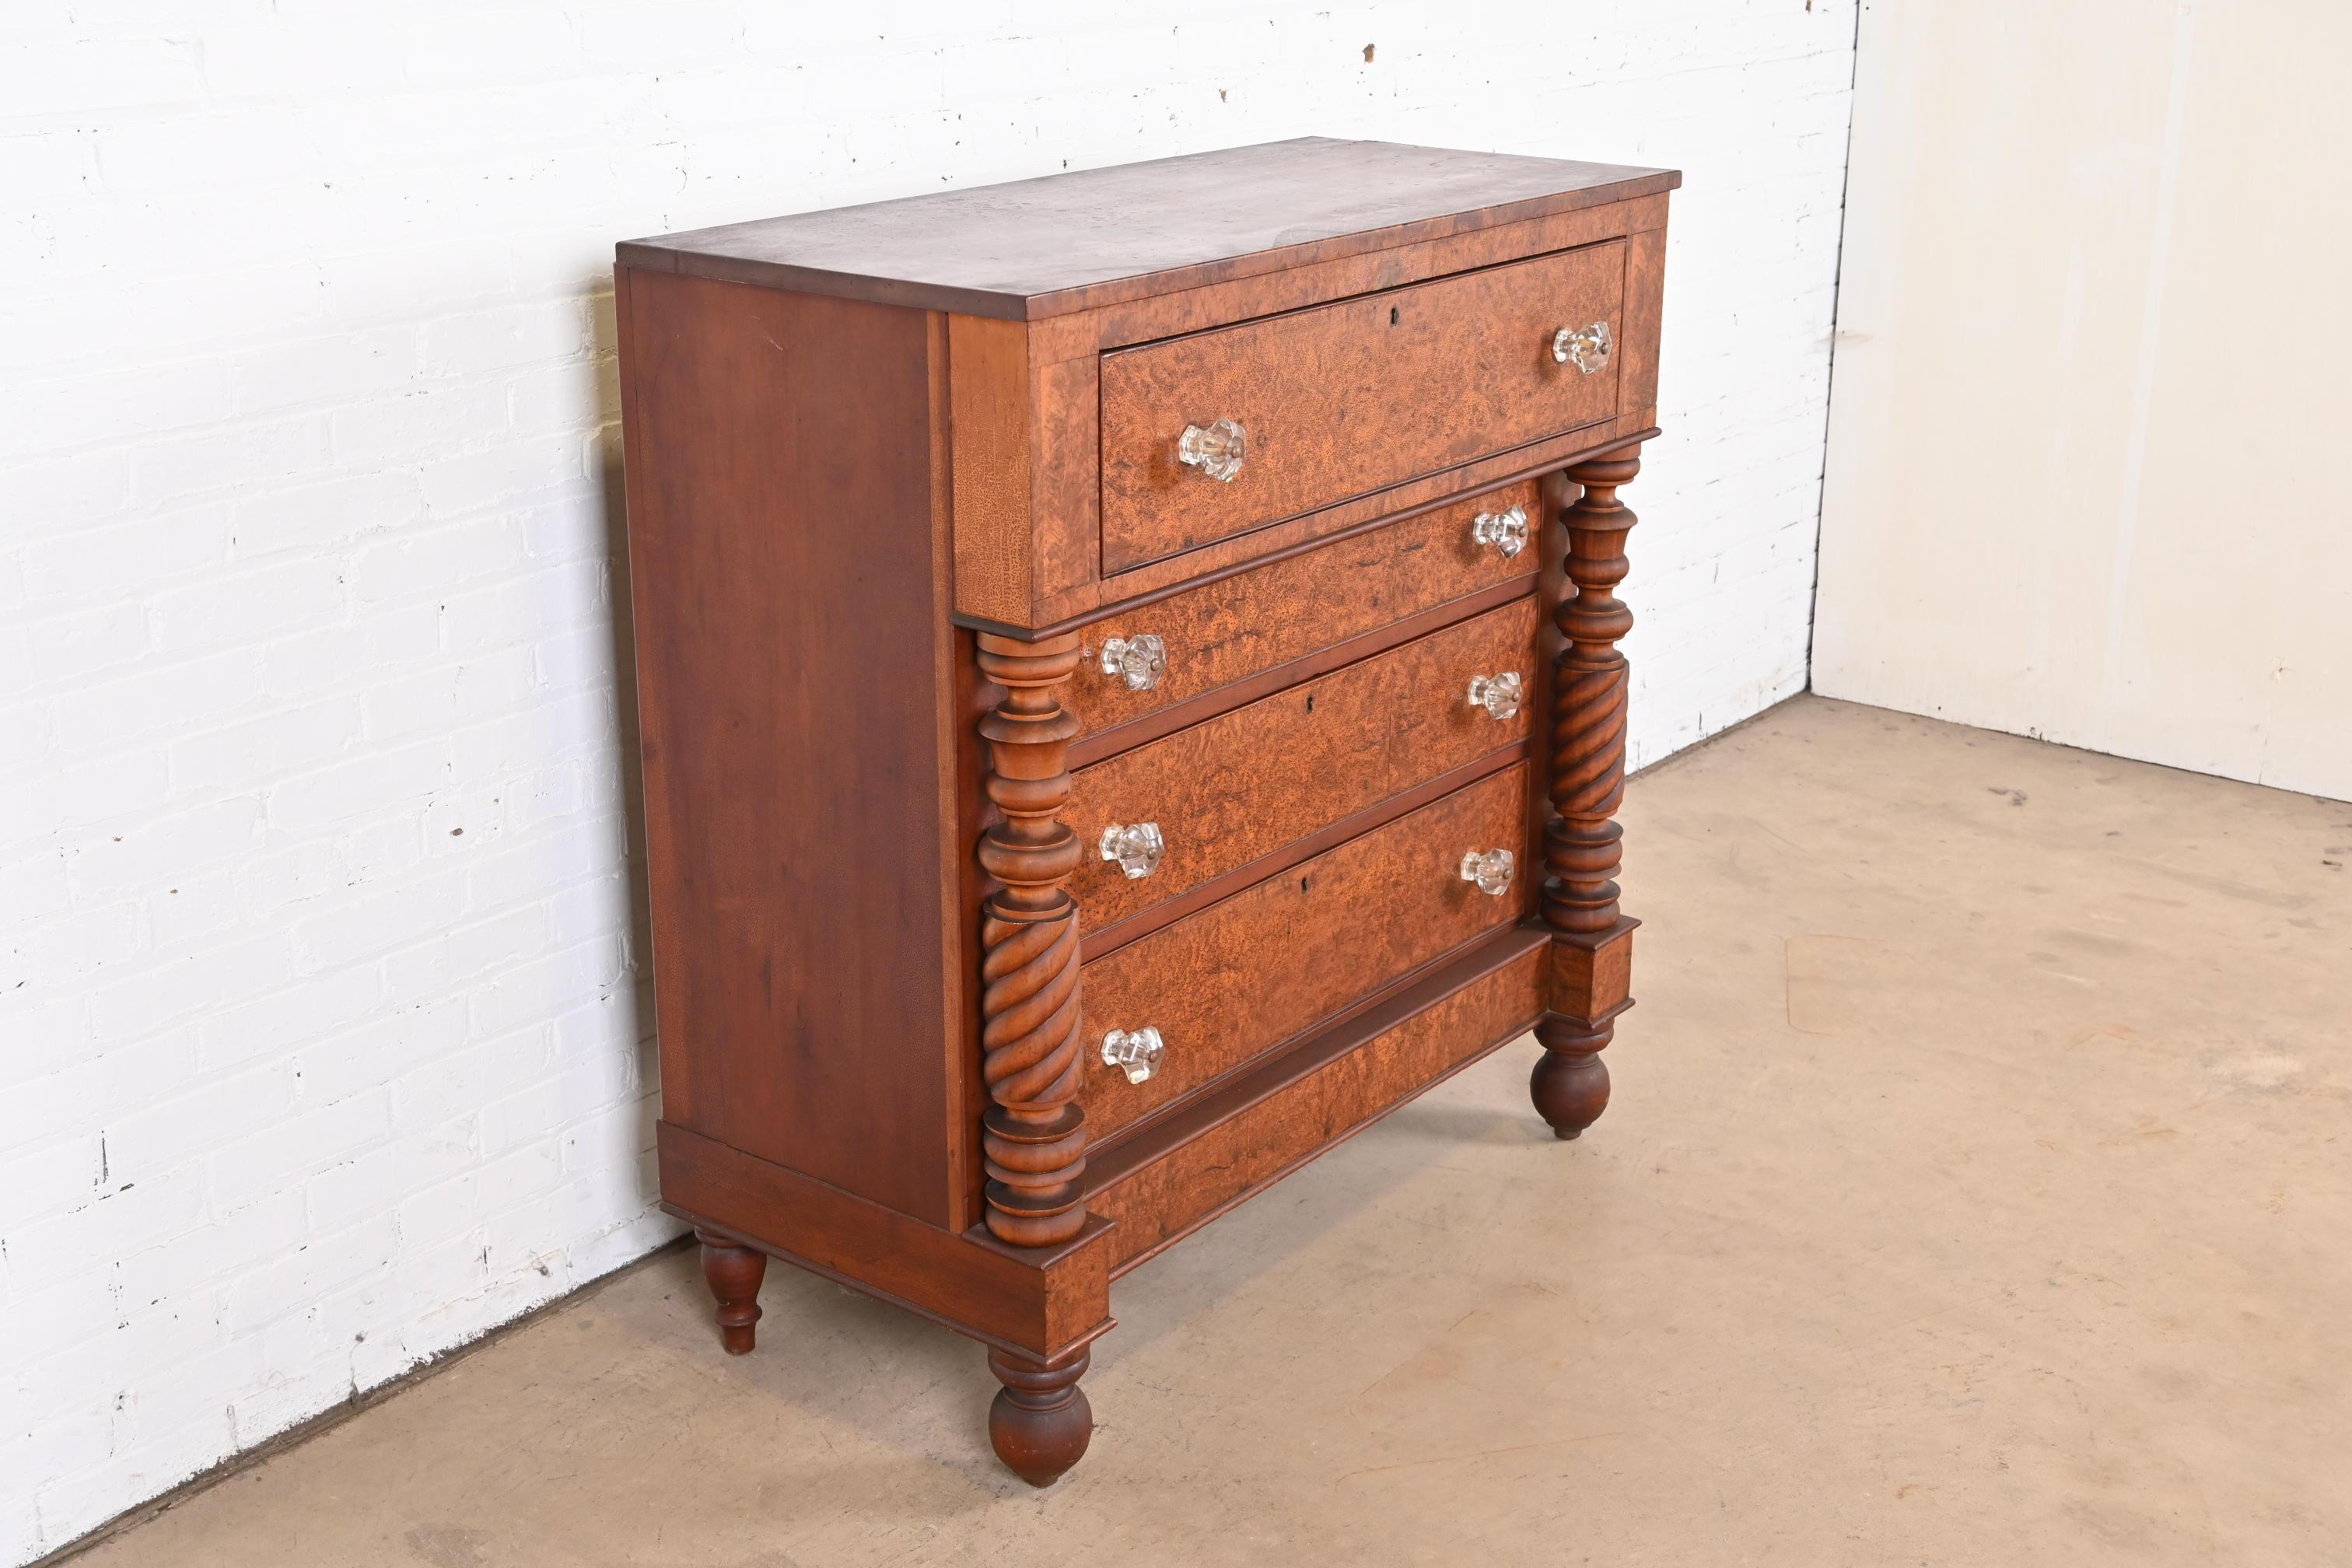 19th Century Antique American Empire Burled Mahogany Chest of Drawers, Circa 1820s For Sale